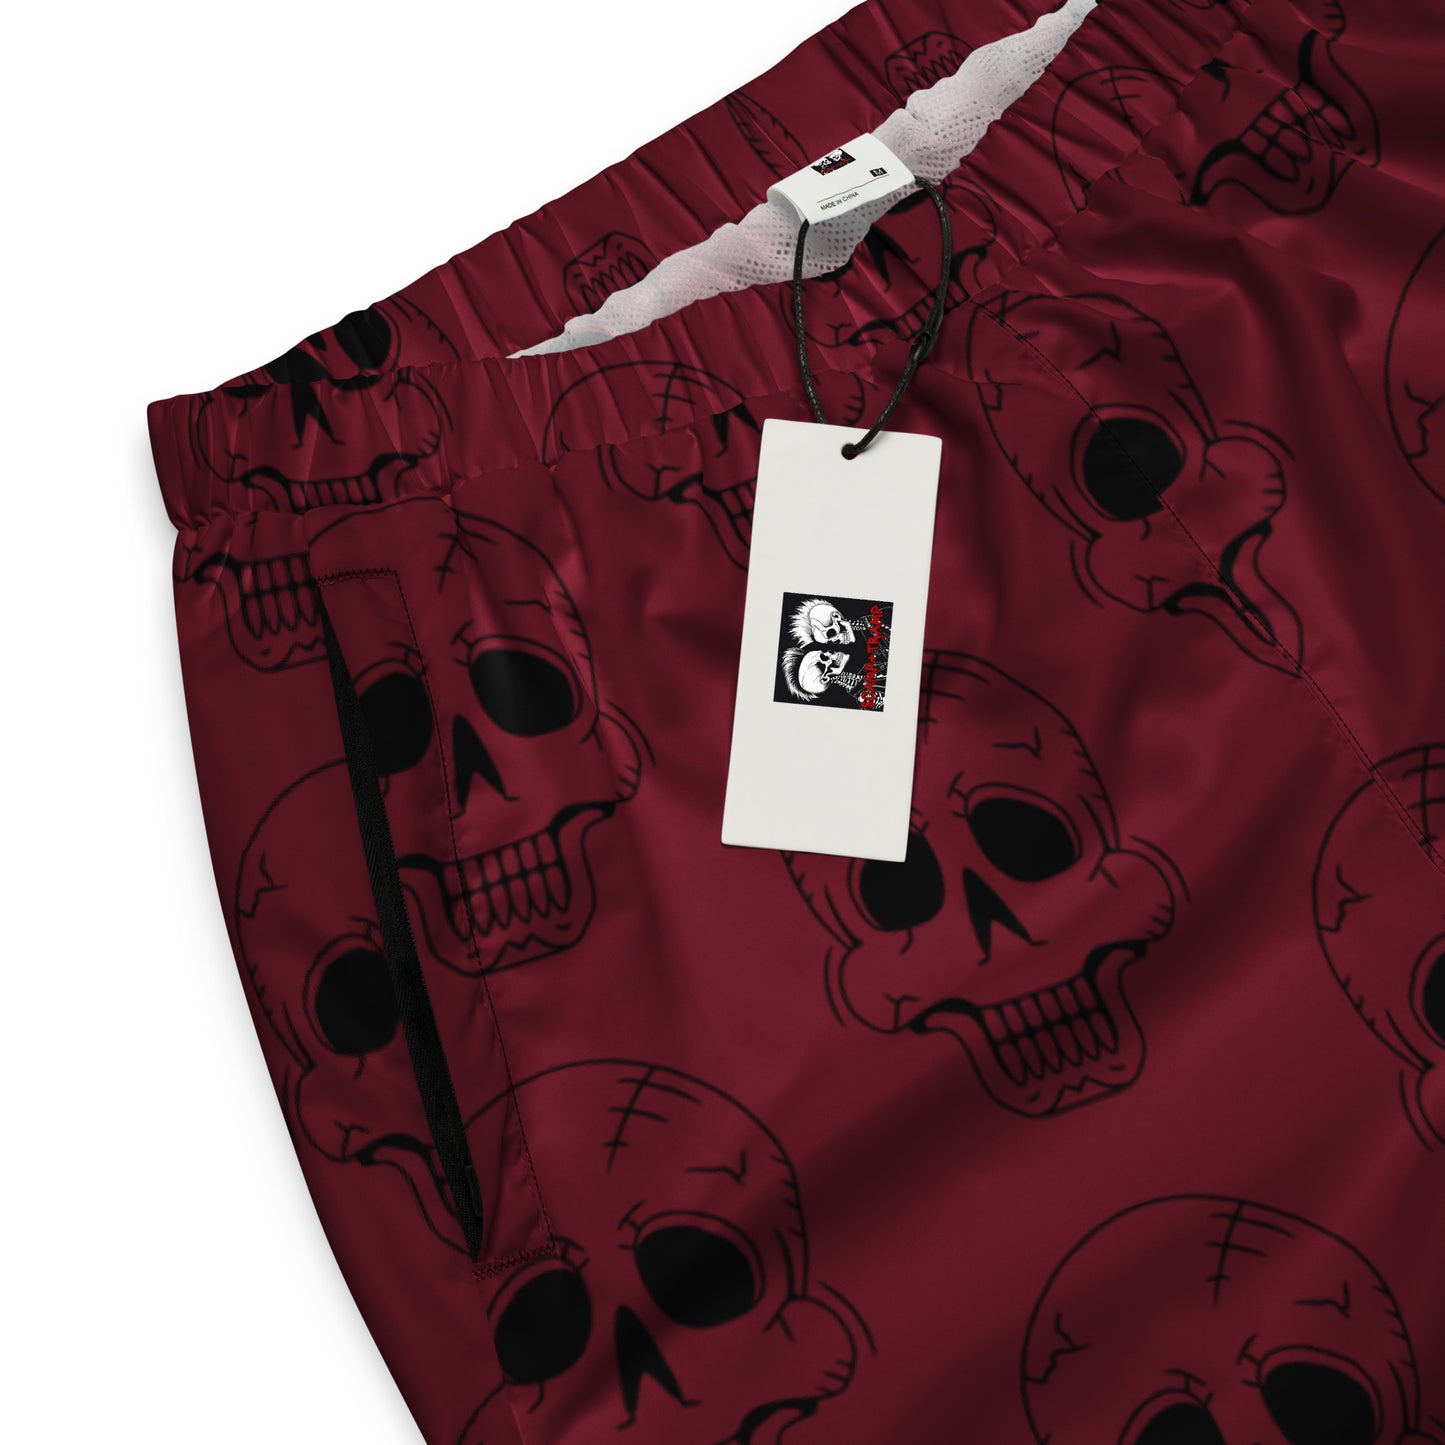 RED LAUGHING SKULL TRACK PANTS